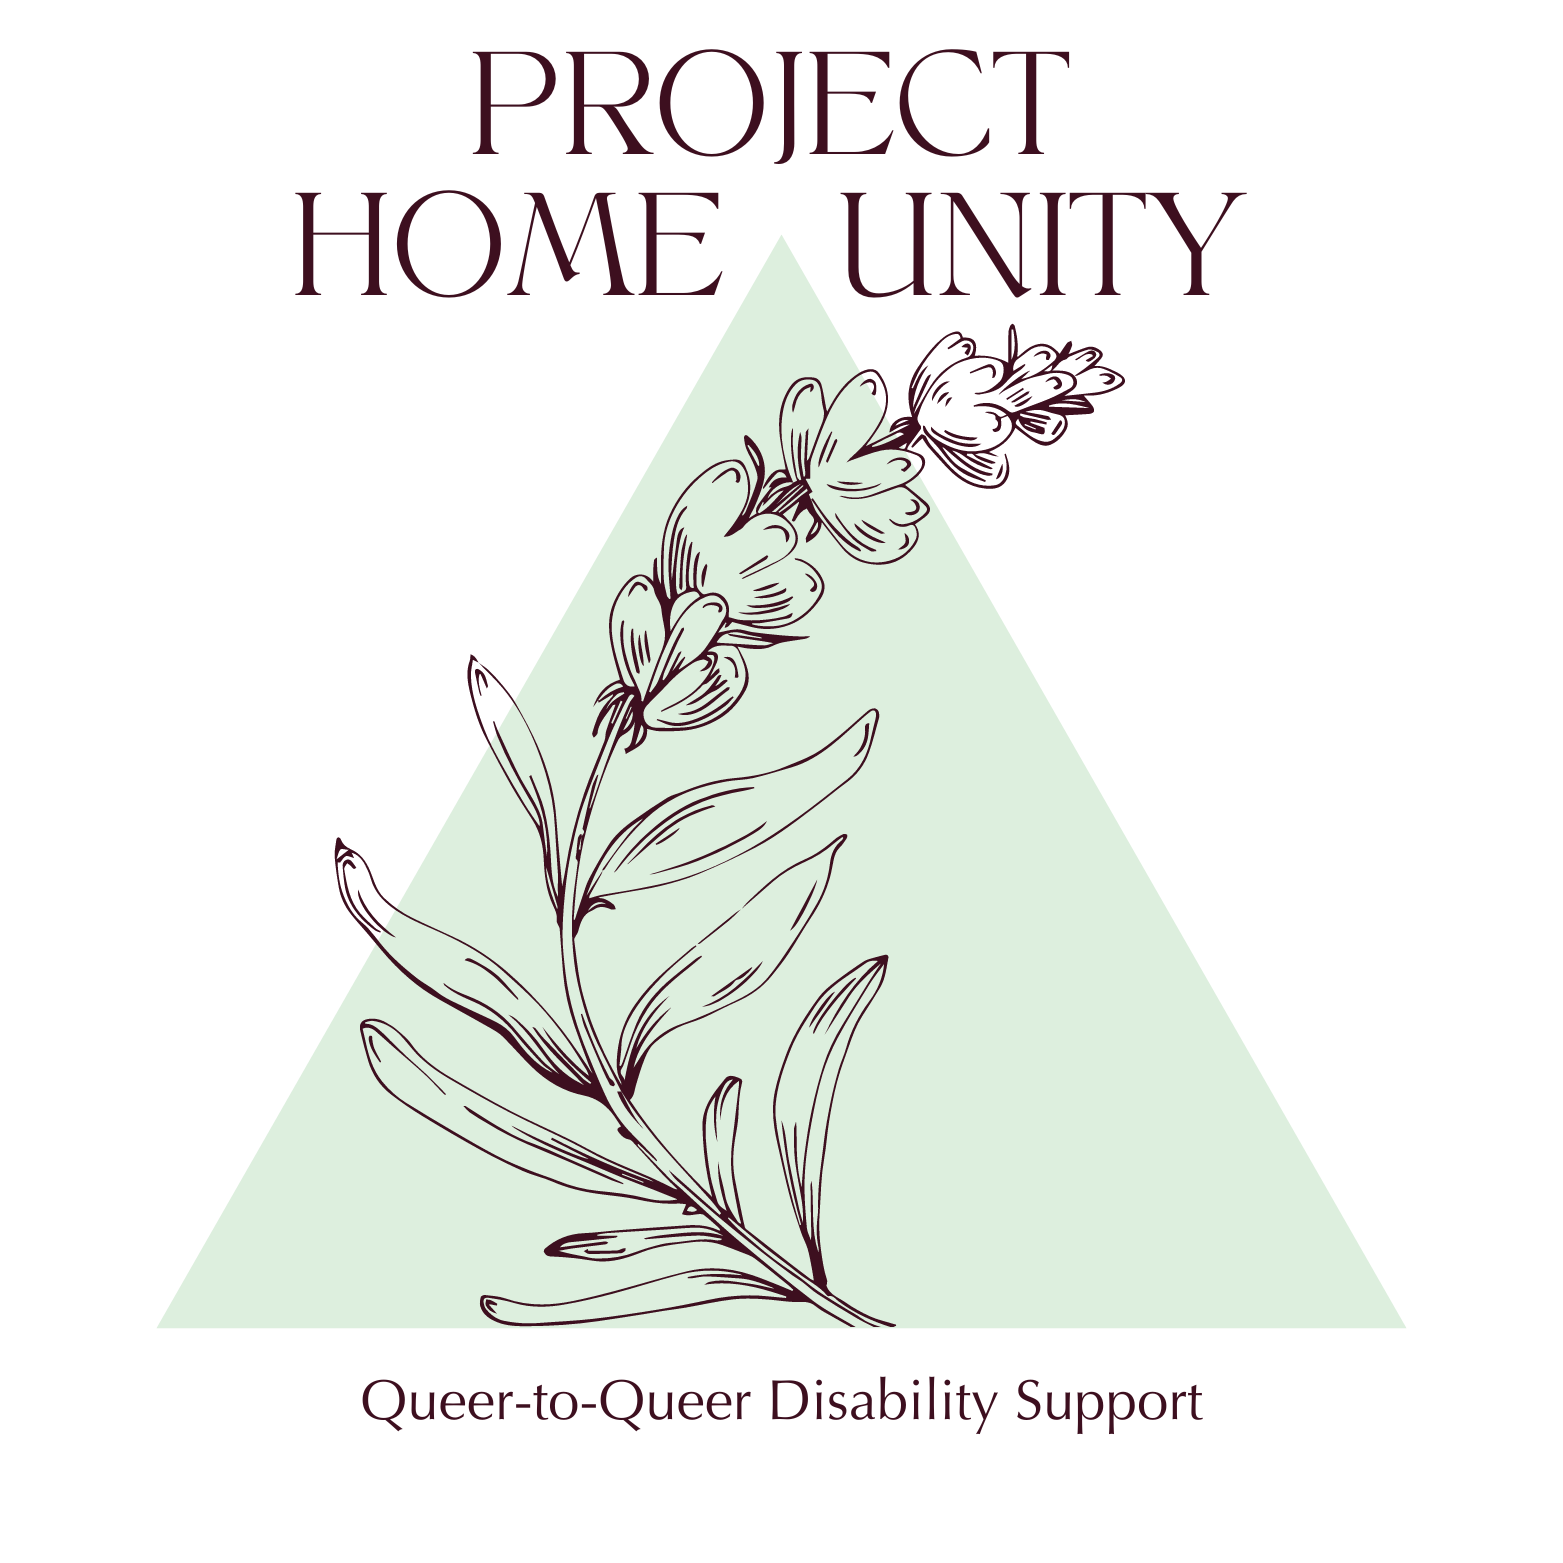 Project Home Unity's logo